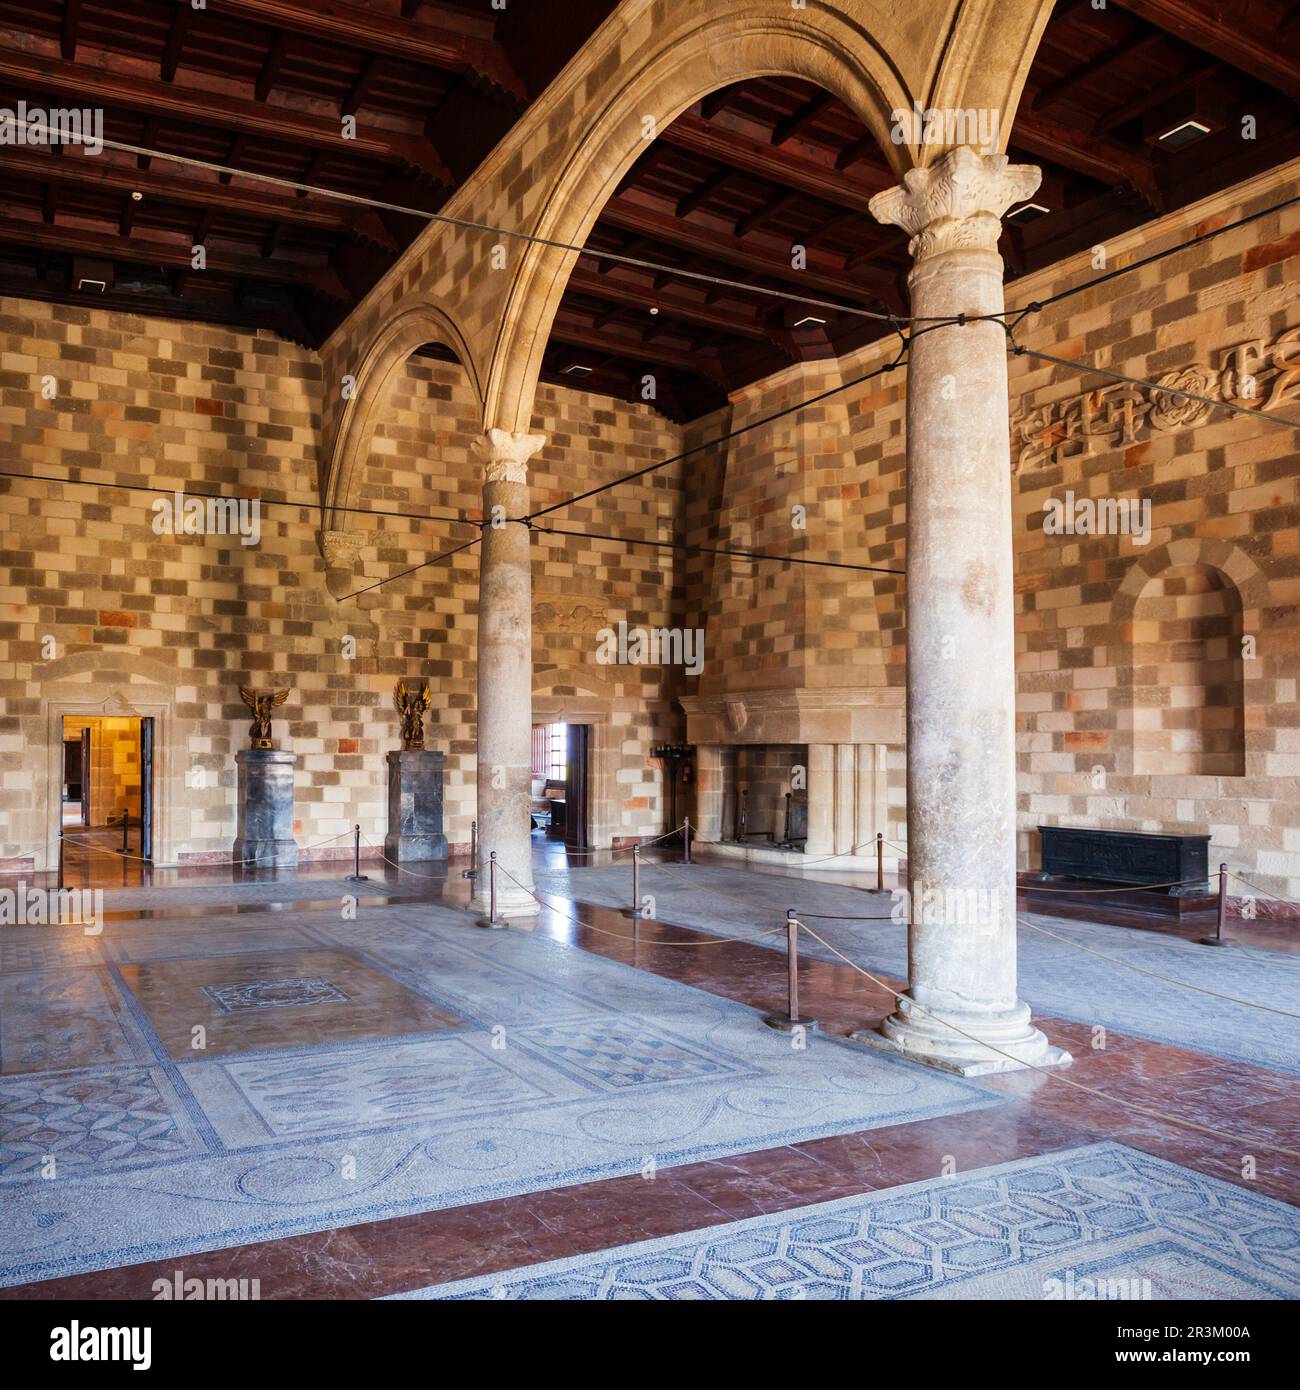 RHODES, GREECE - MAY 13, 2018: Palace of the Grand Master in the old town of Rhodes Greece Stock Photo